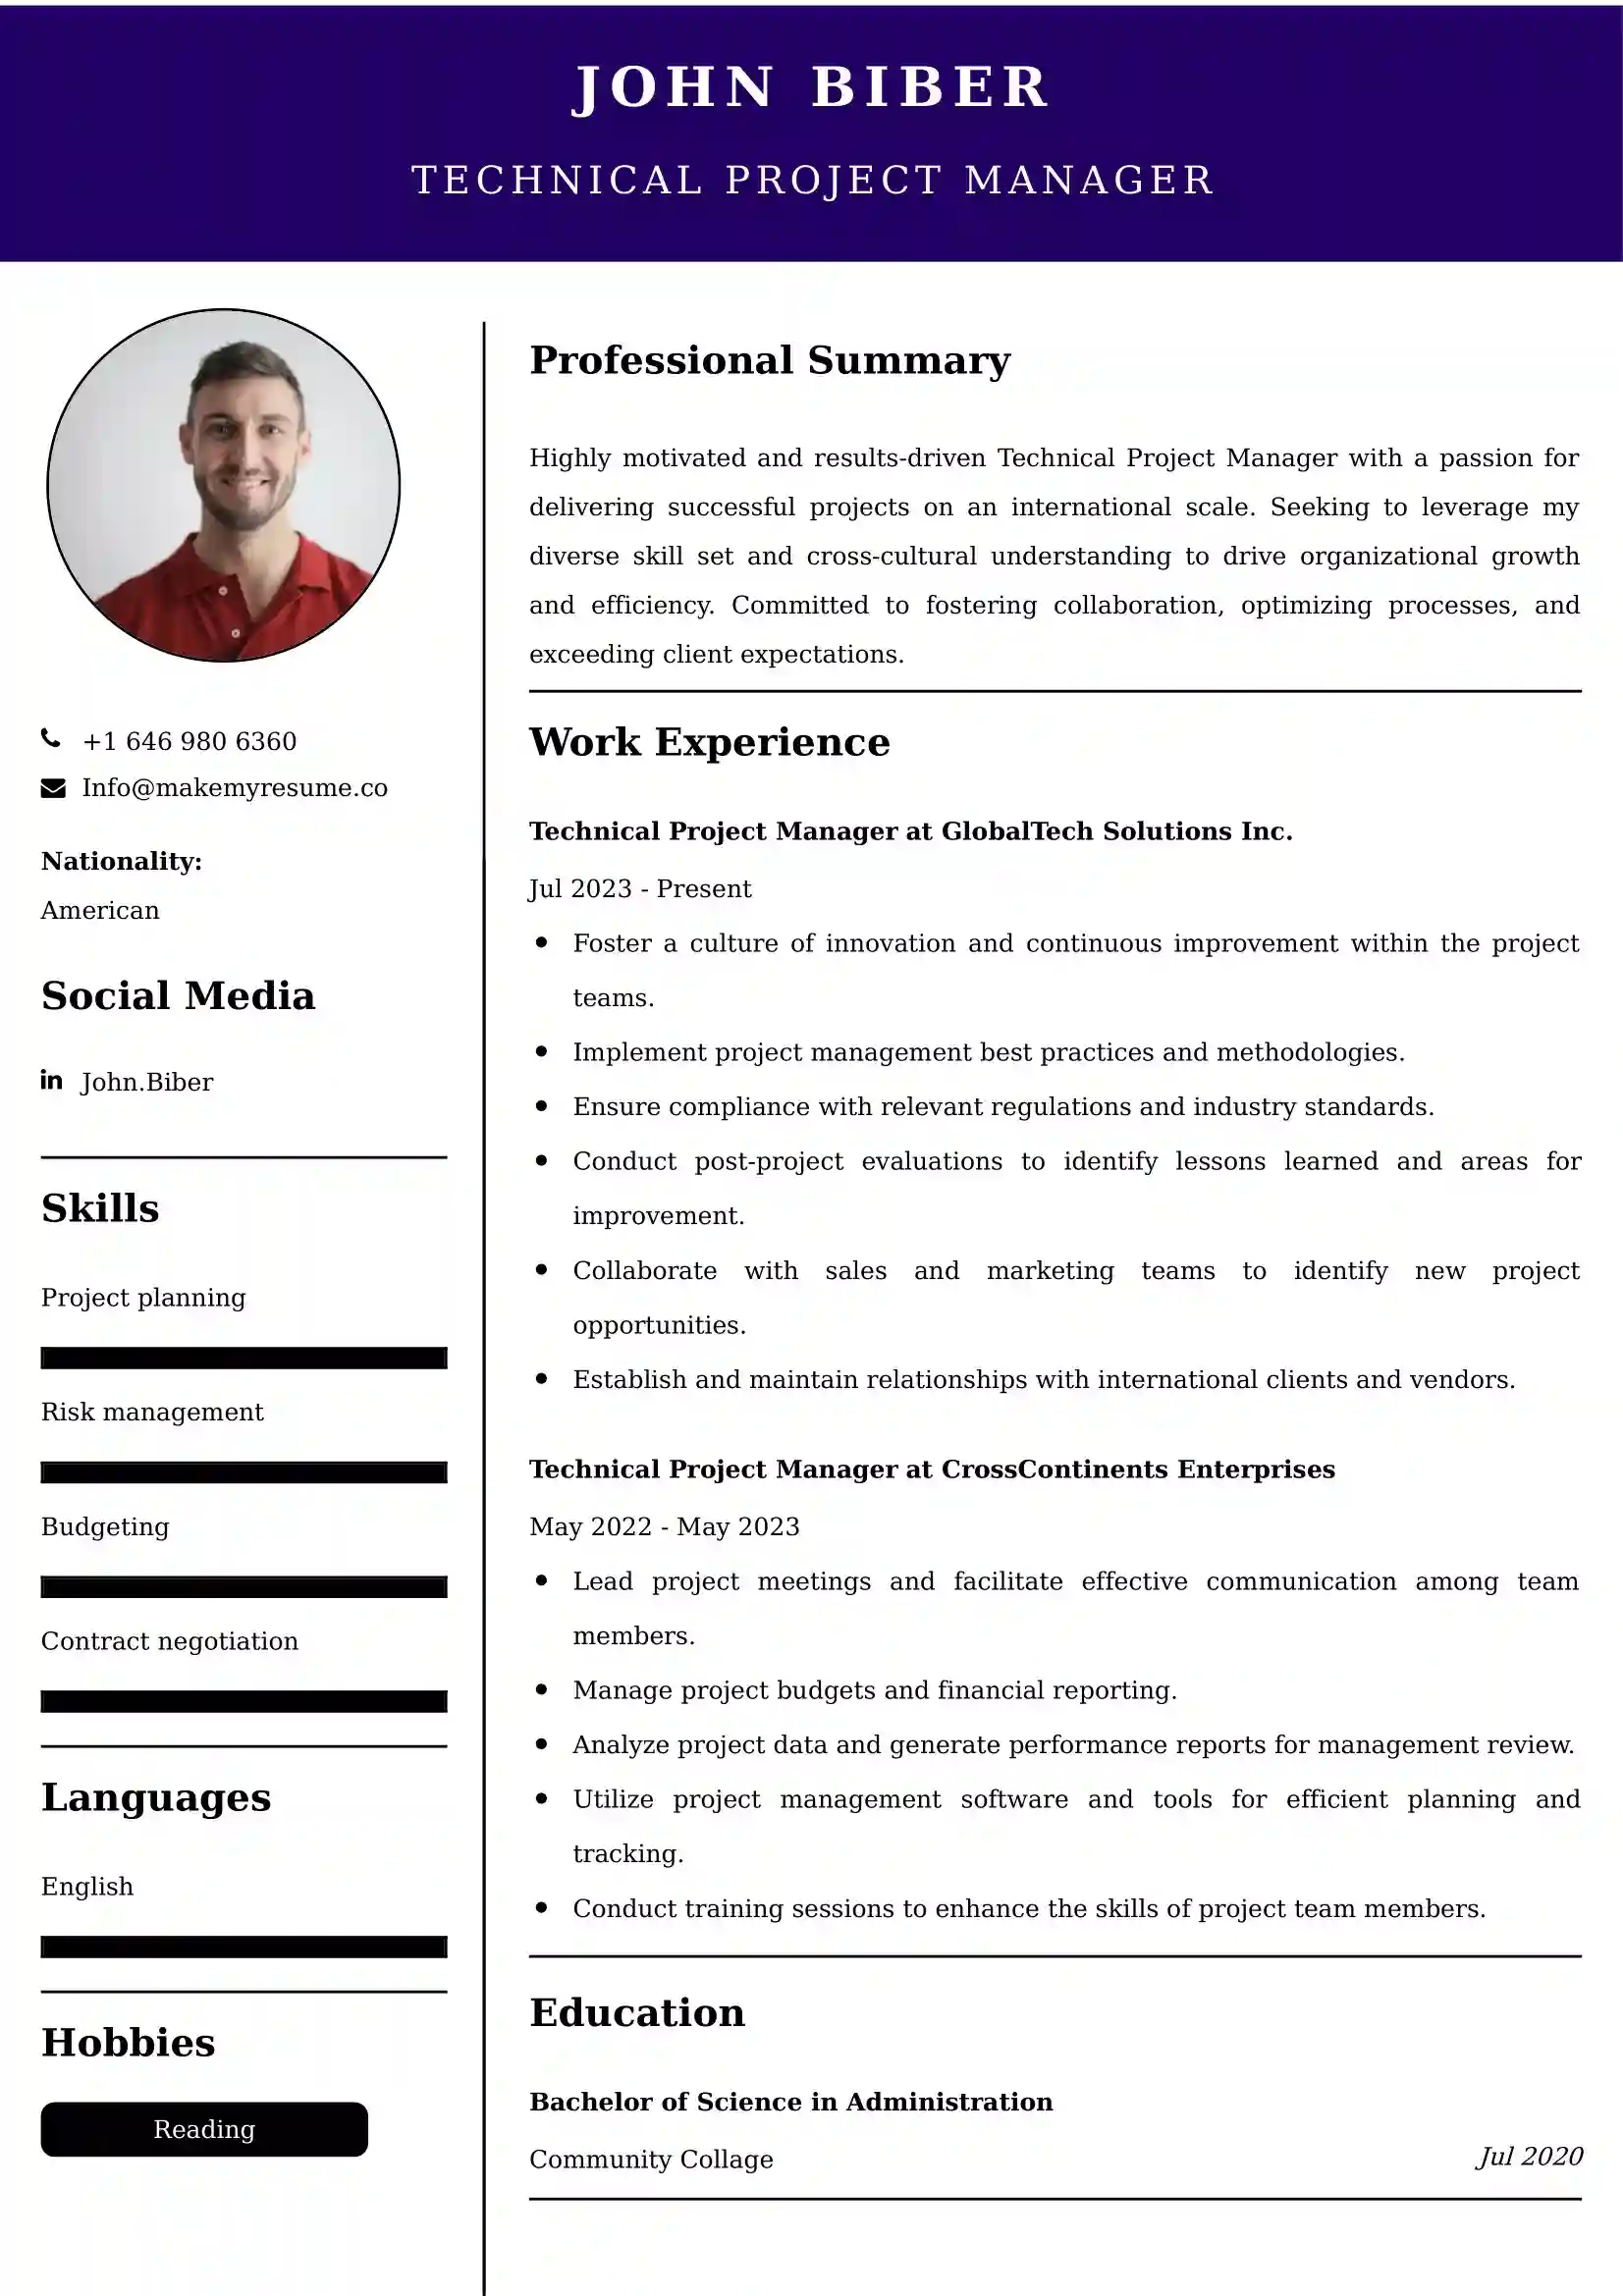 Technical Project Manager CV Examples - US Format